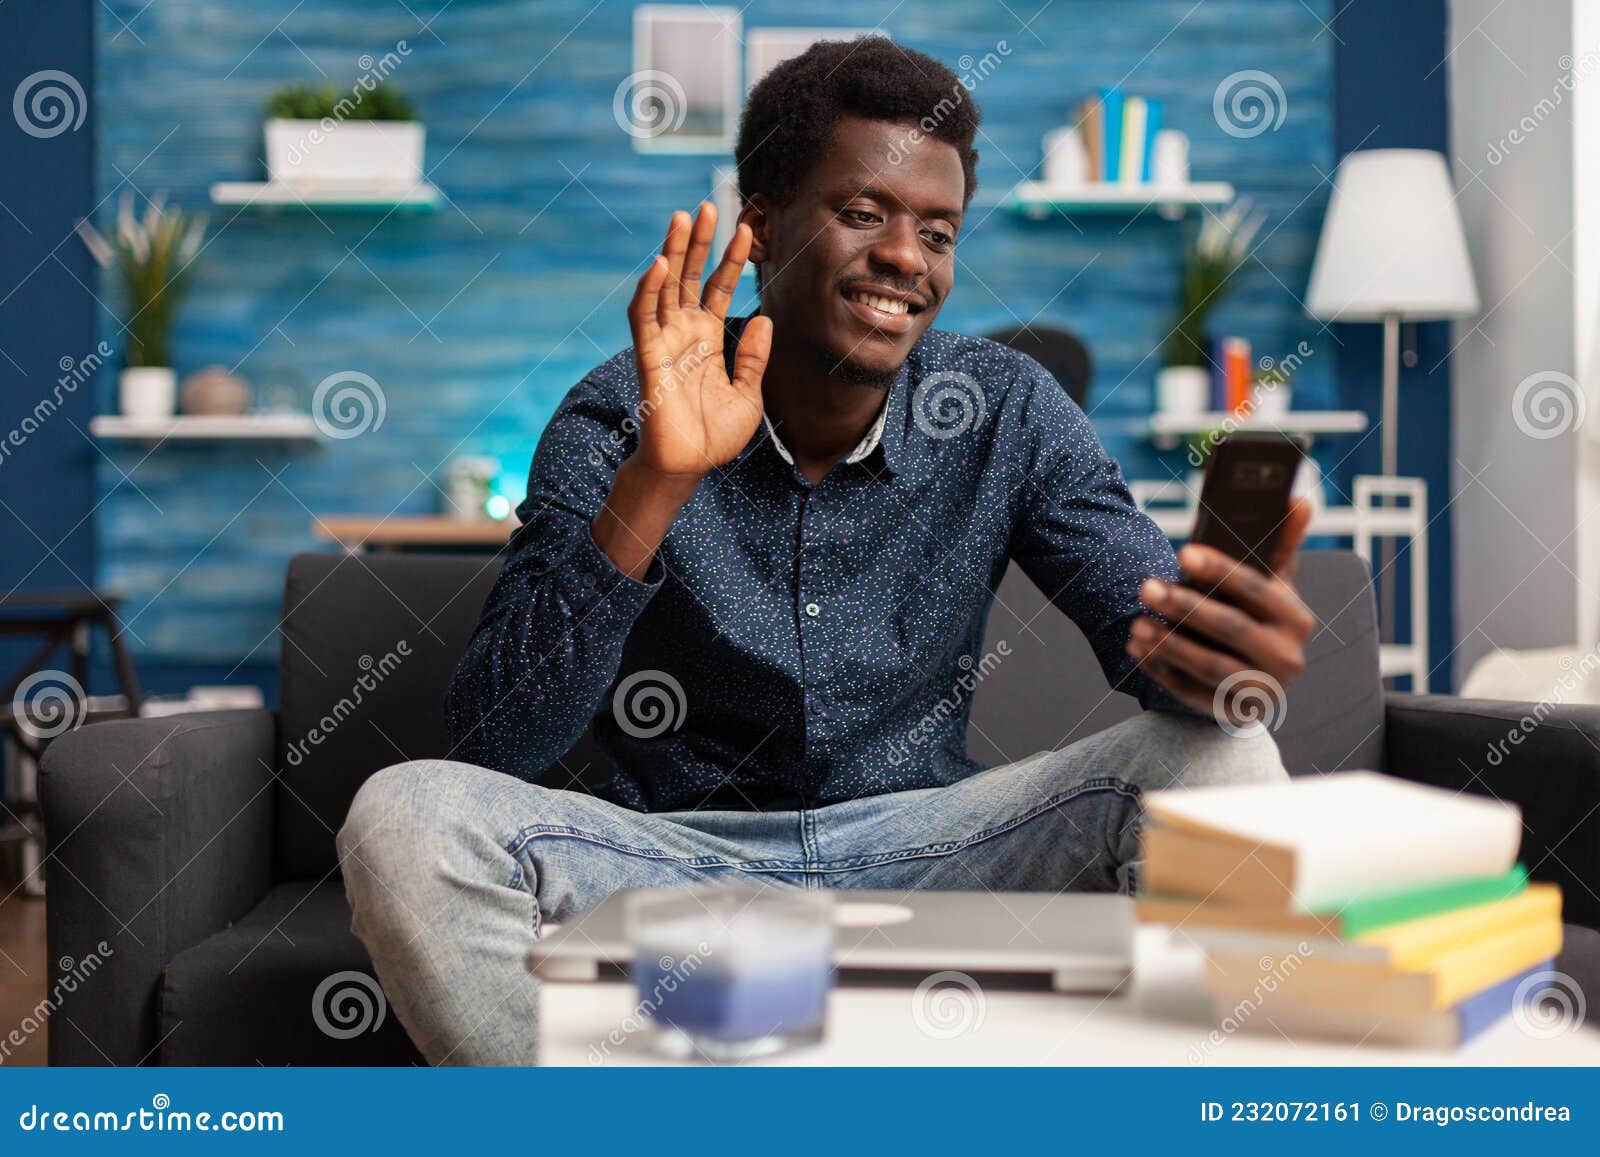 smiling teenager greeting remote collegue discussing marketing ideas